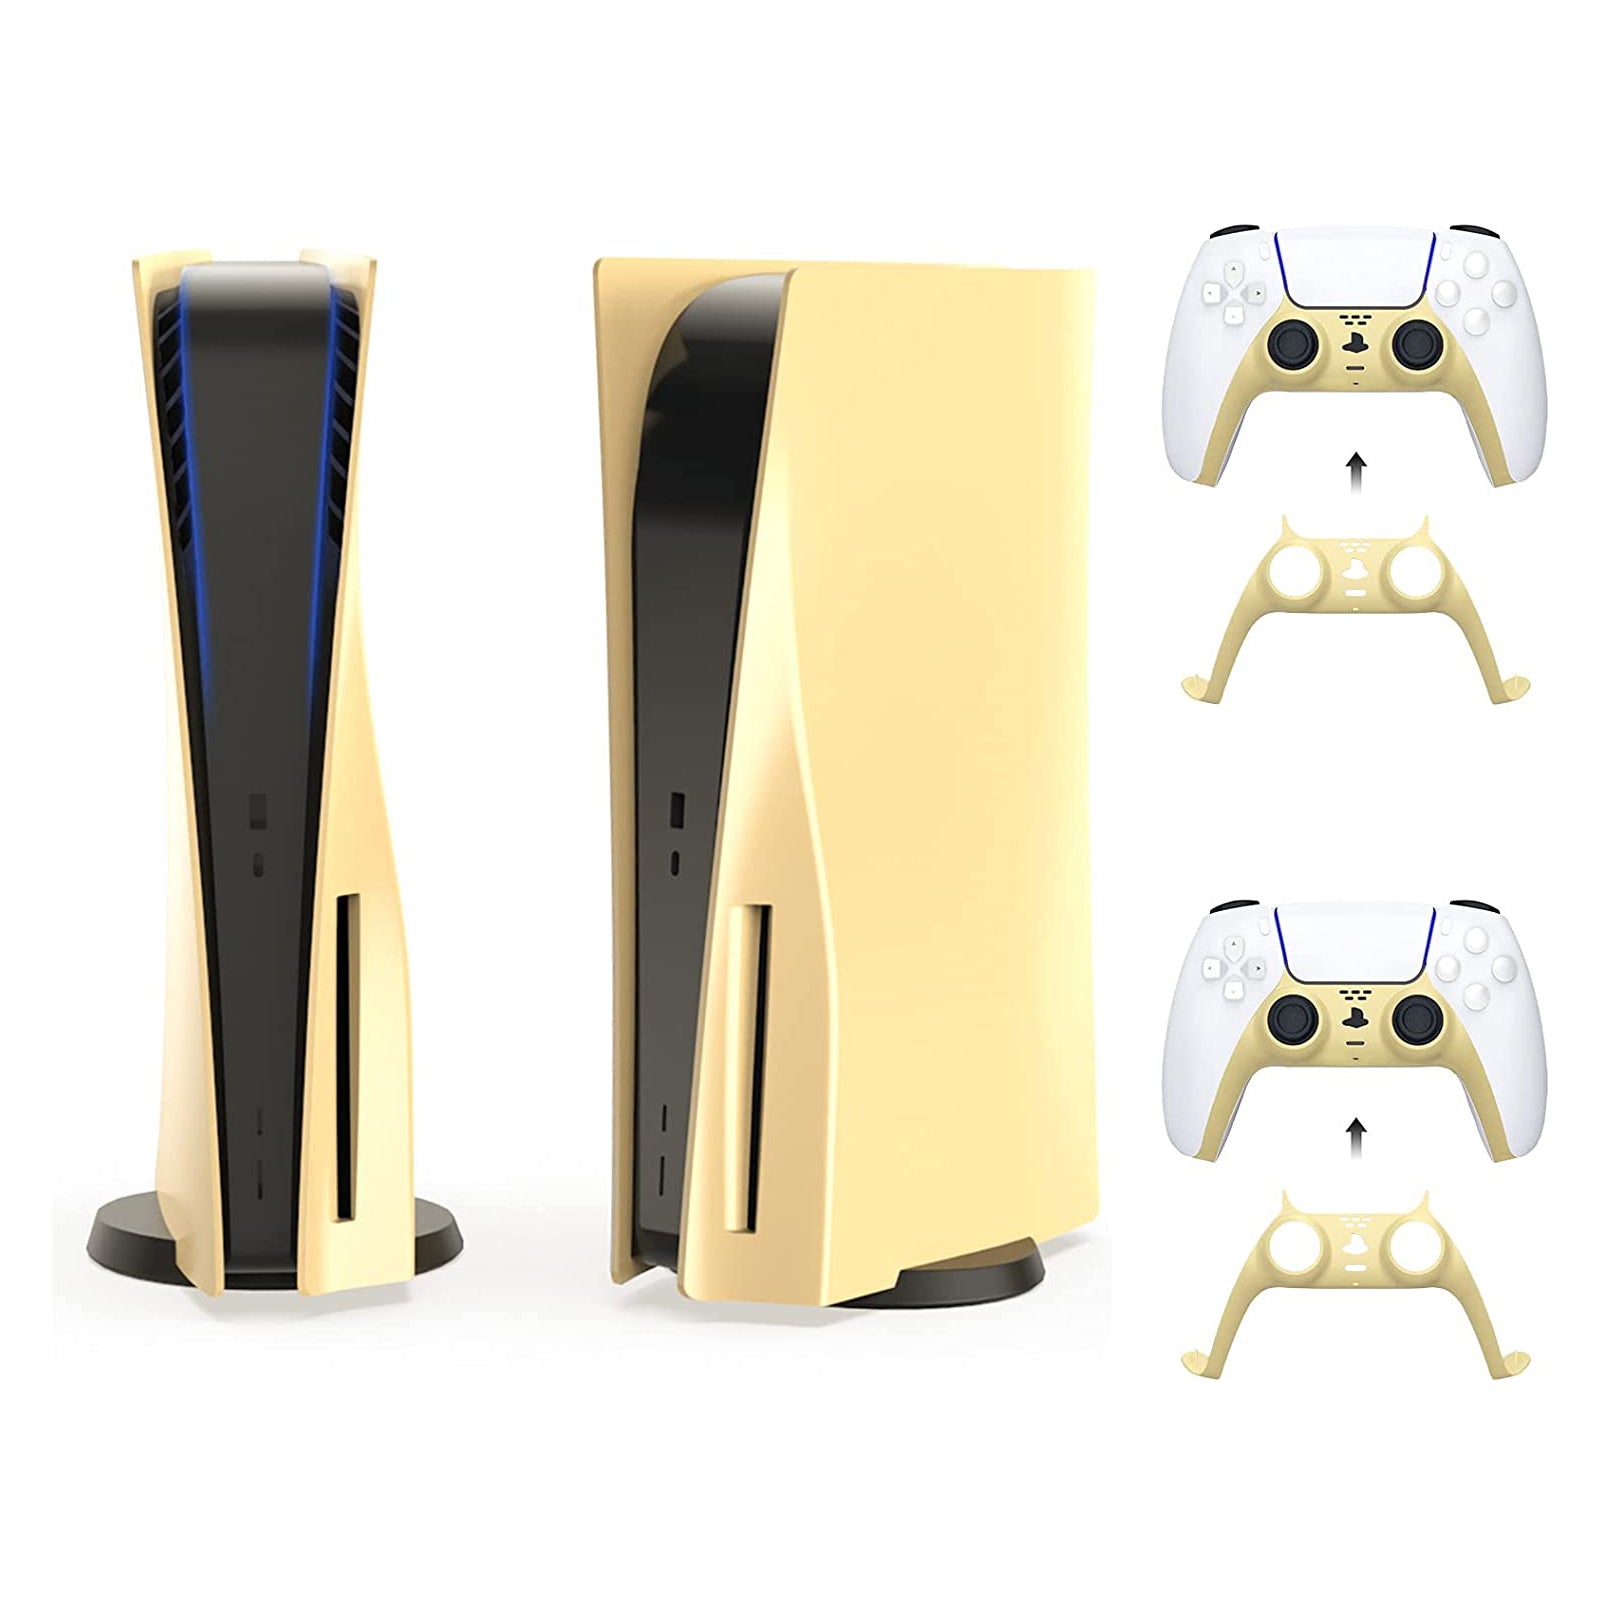 NexiGo PS5 Console and Controller Stylish Cover Kit (Gold)